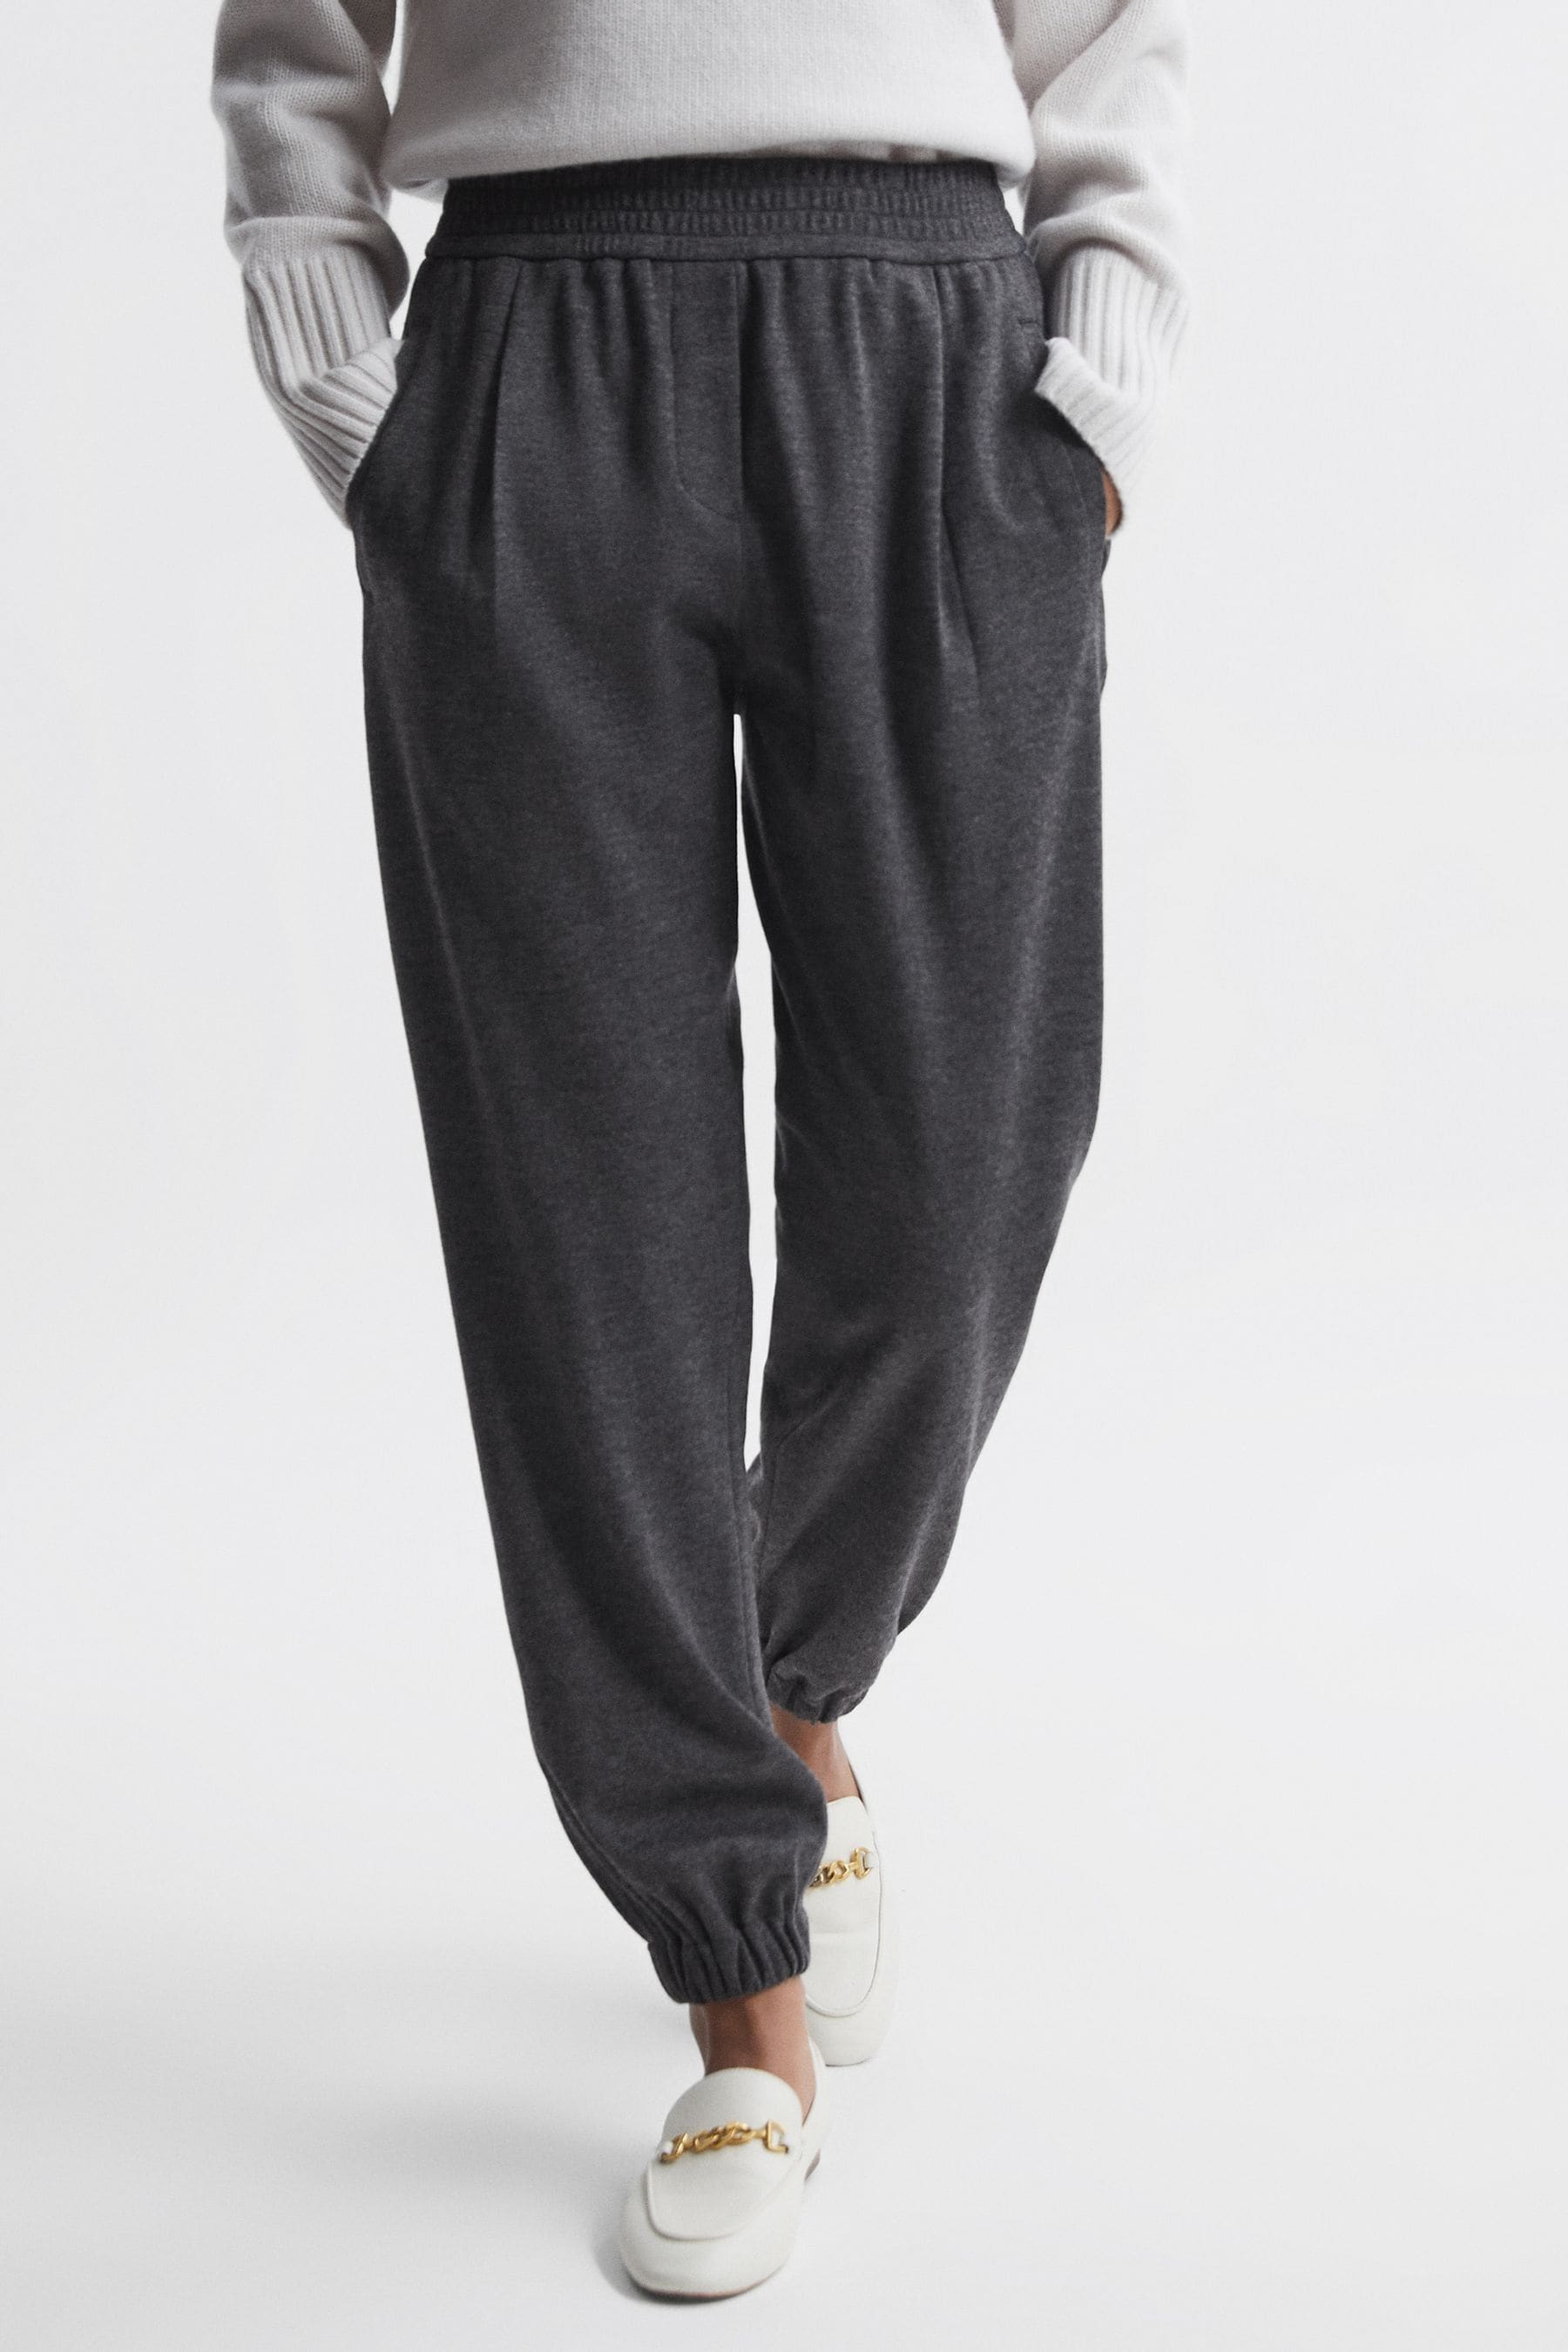 Reiss Karina - Charcoal Wool Elasticated Pleat Front Joggers, Us 8